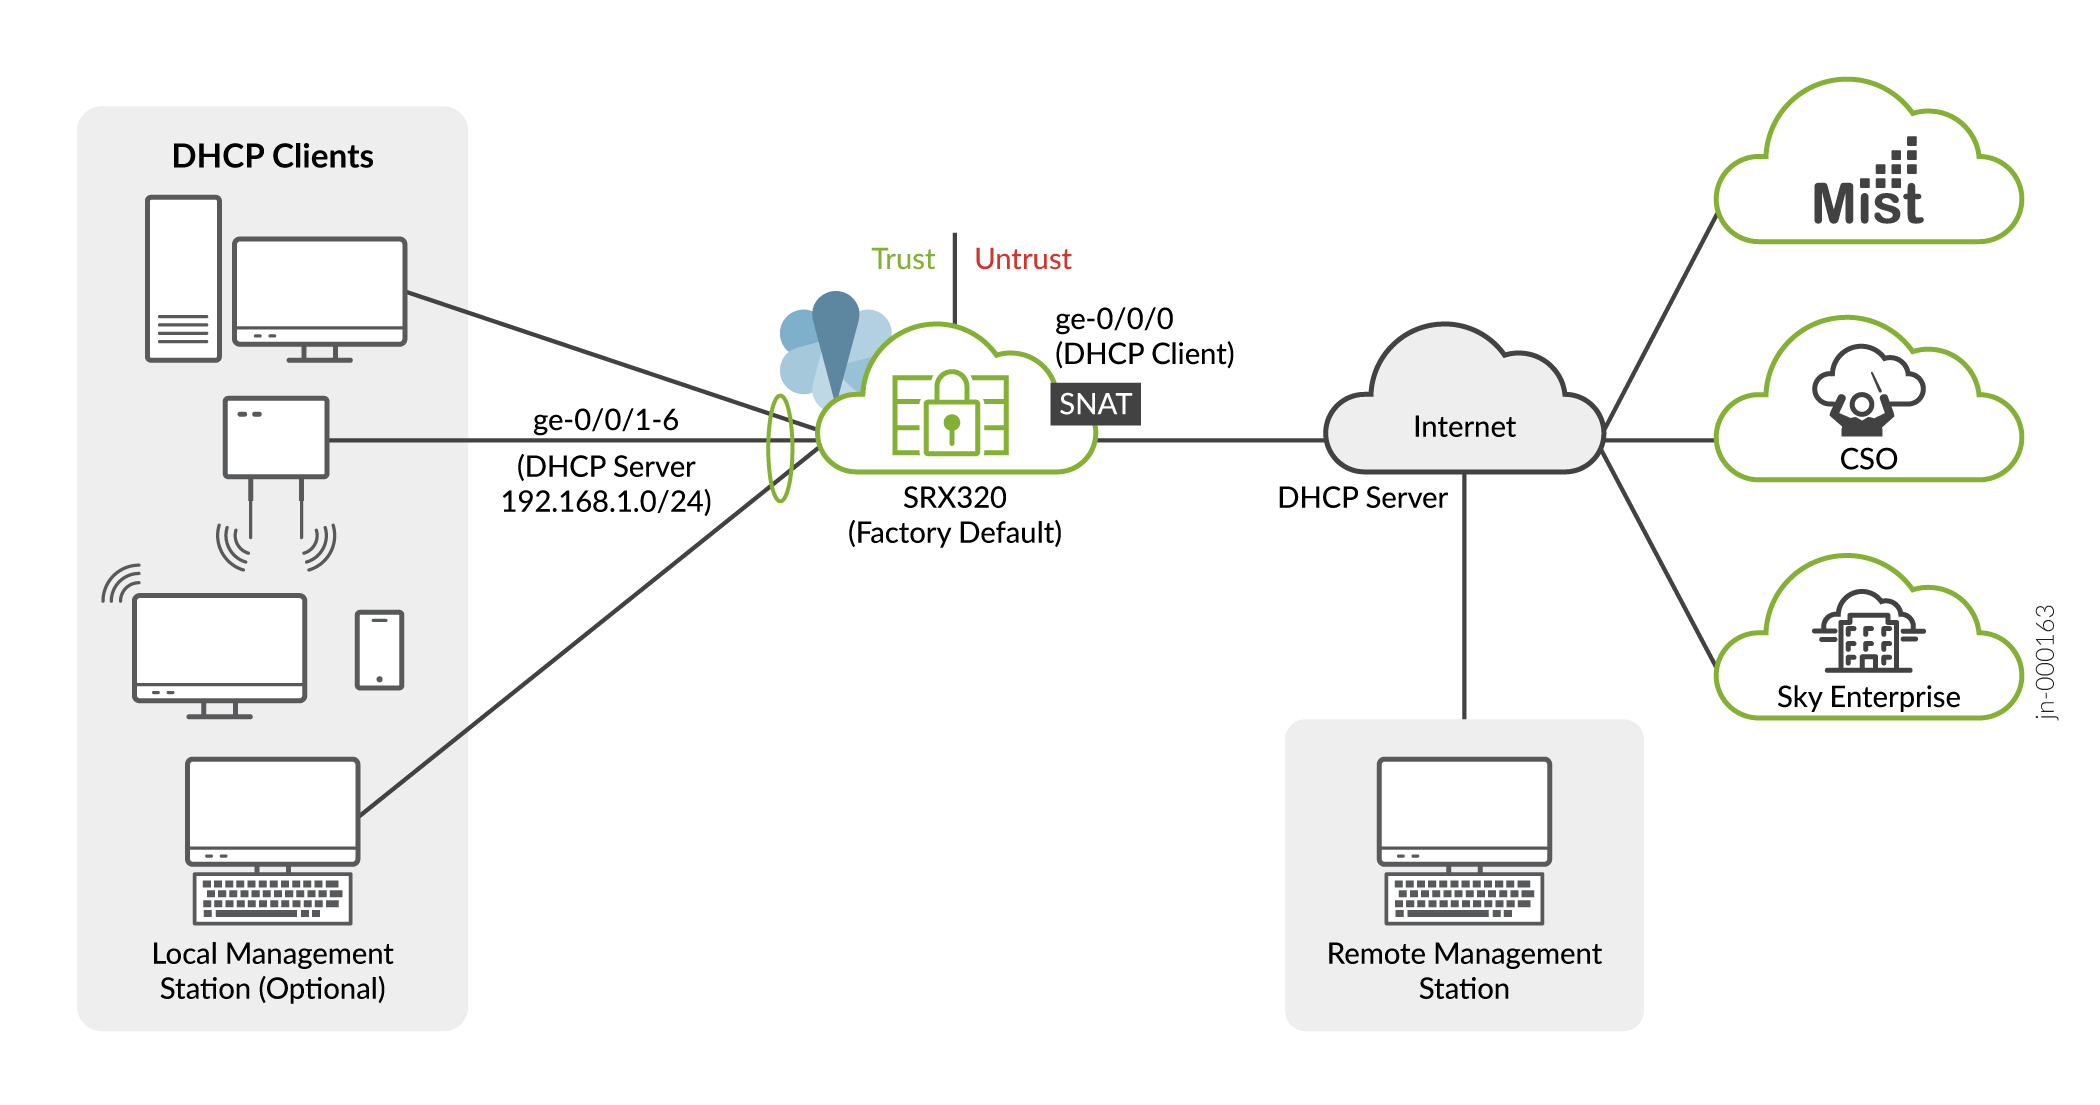 Plug and Play for Cloud-Based Provisioning